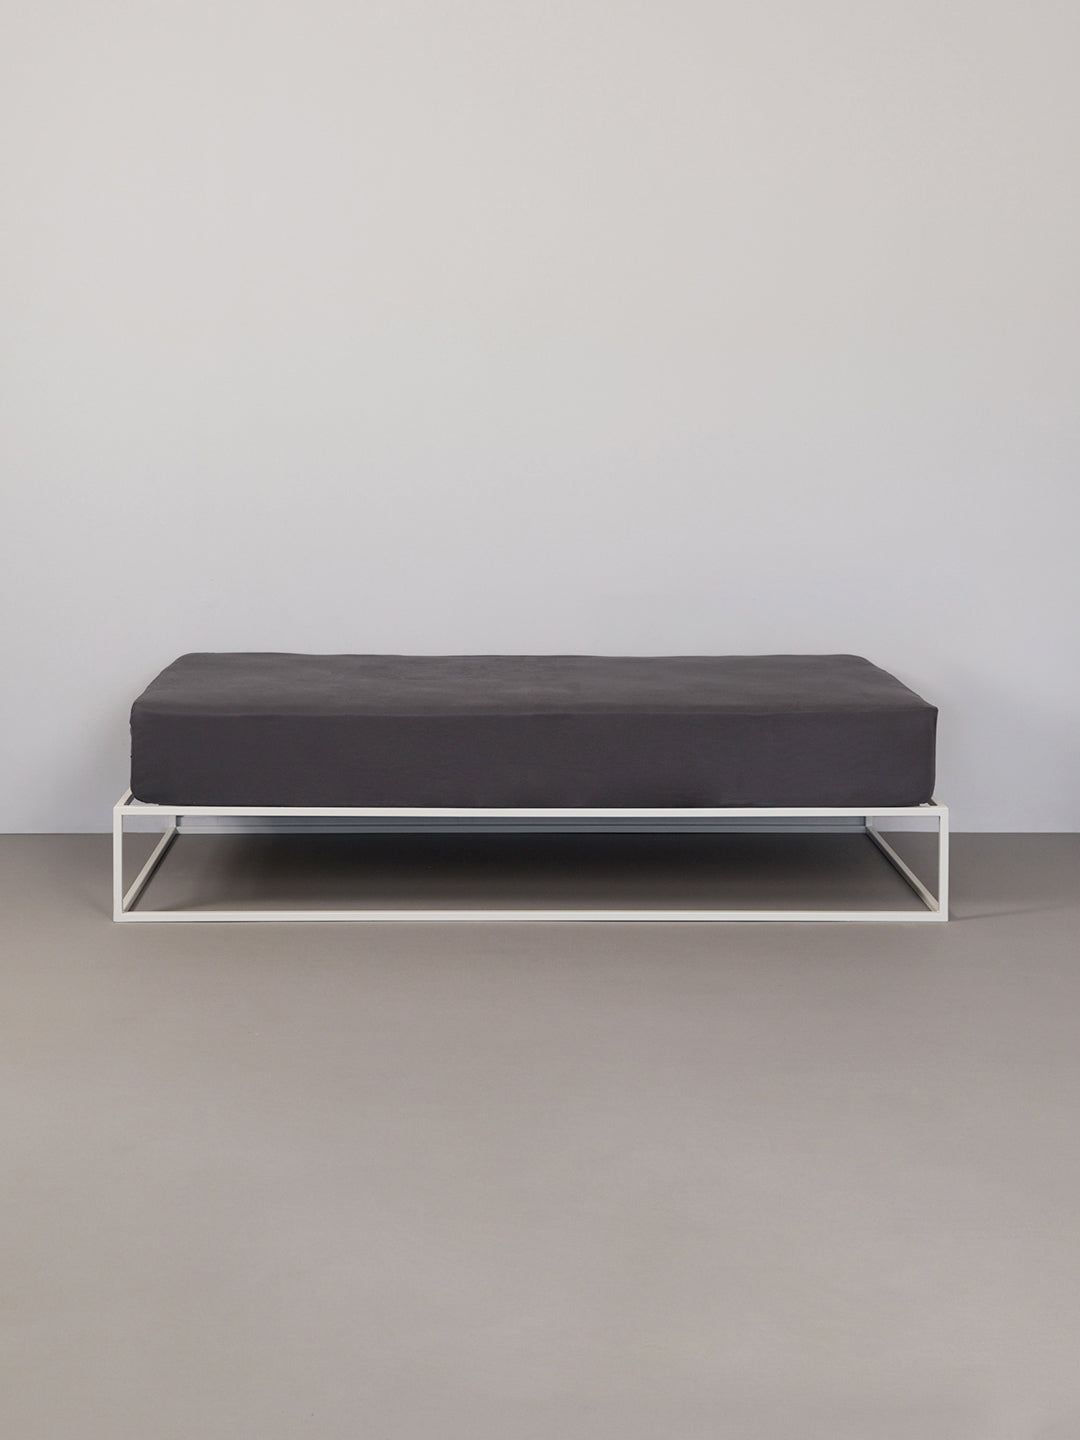 Hey you are on Fitted Bed Sheet | Basic product page. Image: Fitted Sheet on a white metal frame bed in a grey room